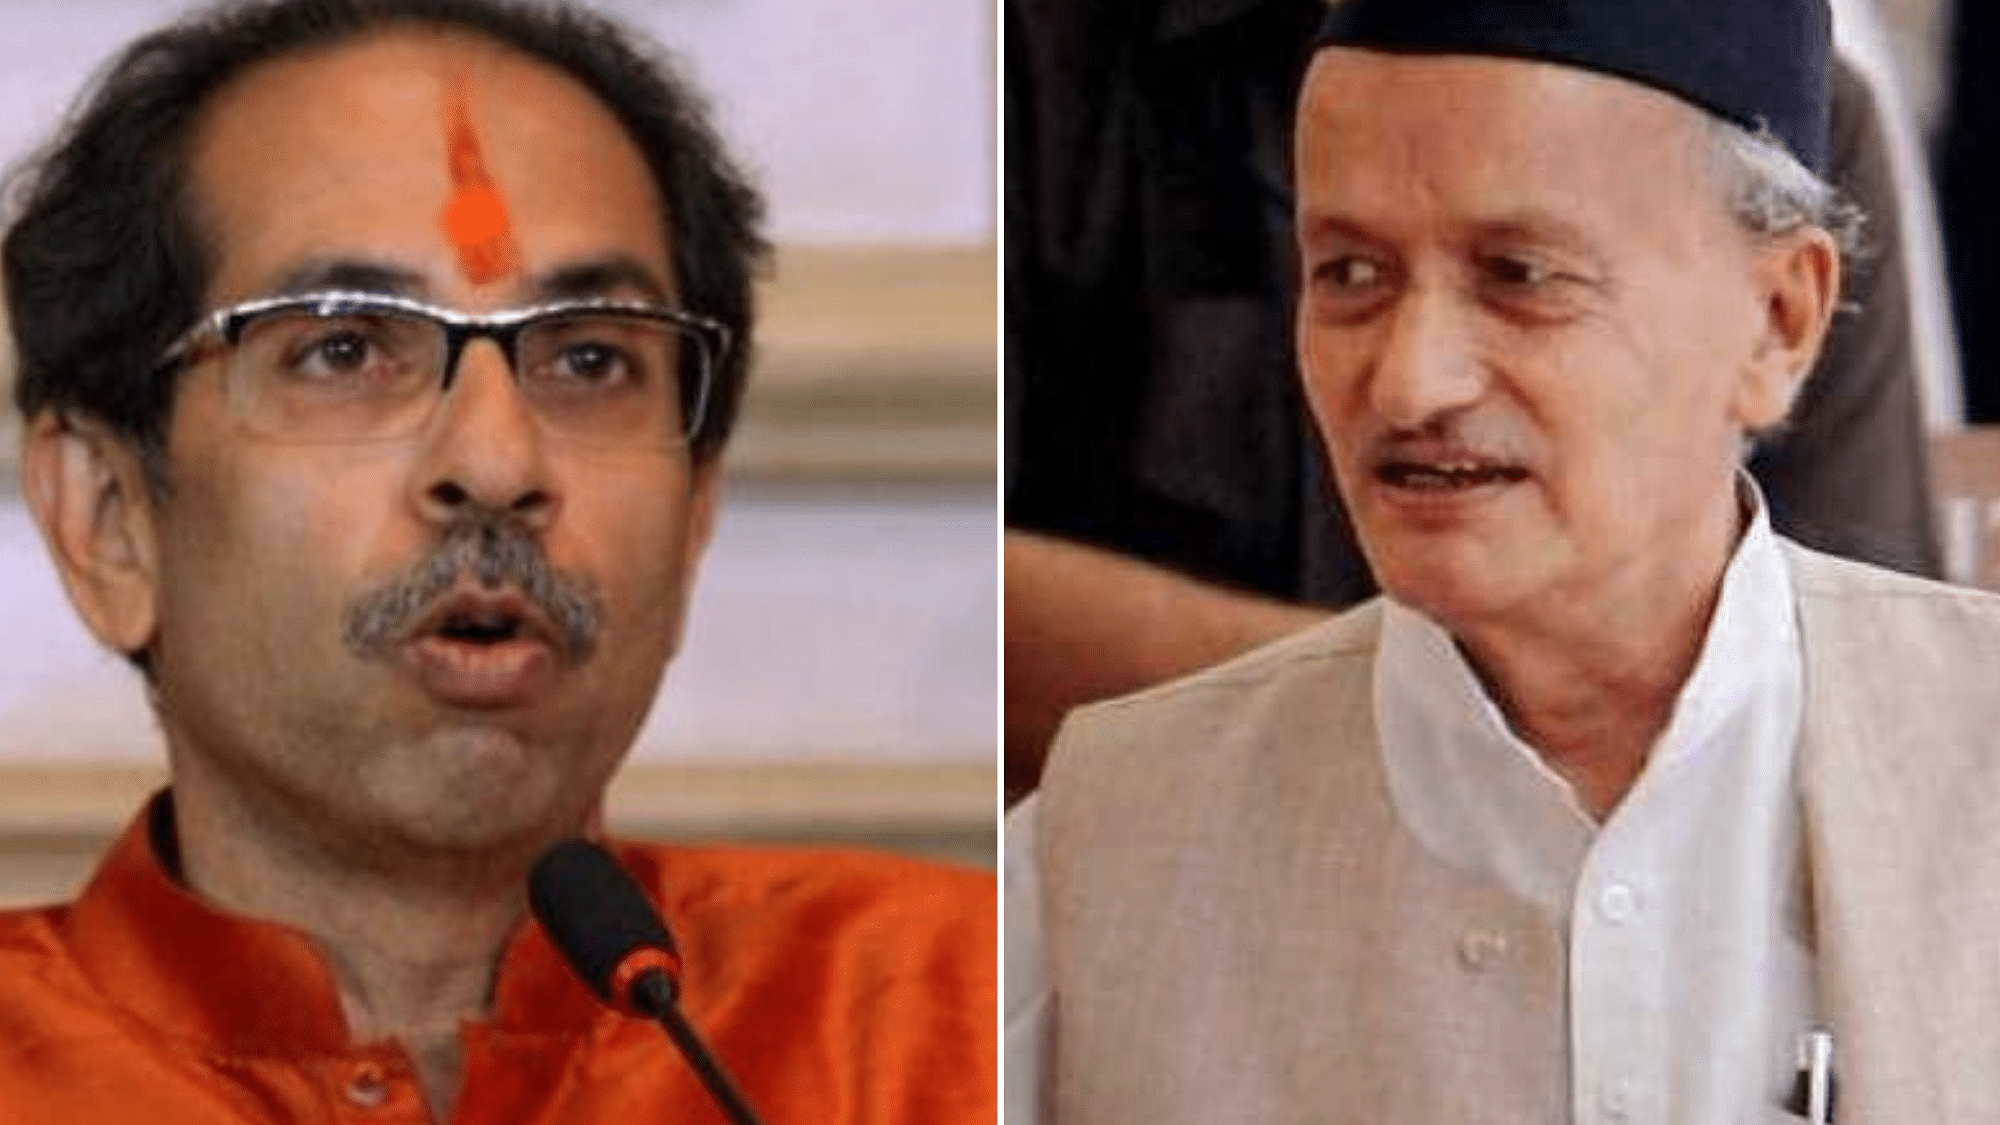 A war of words has erupted between the Governor of Maharashtra Bhagat Singh Koshyari and Chief Minister Uddhav Thackeray over places of worship remaining closed in the state.